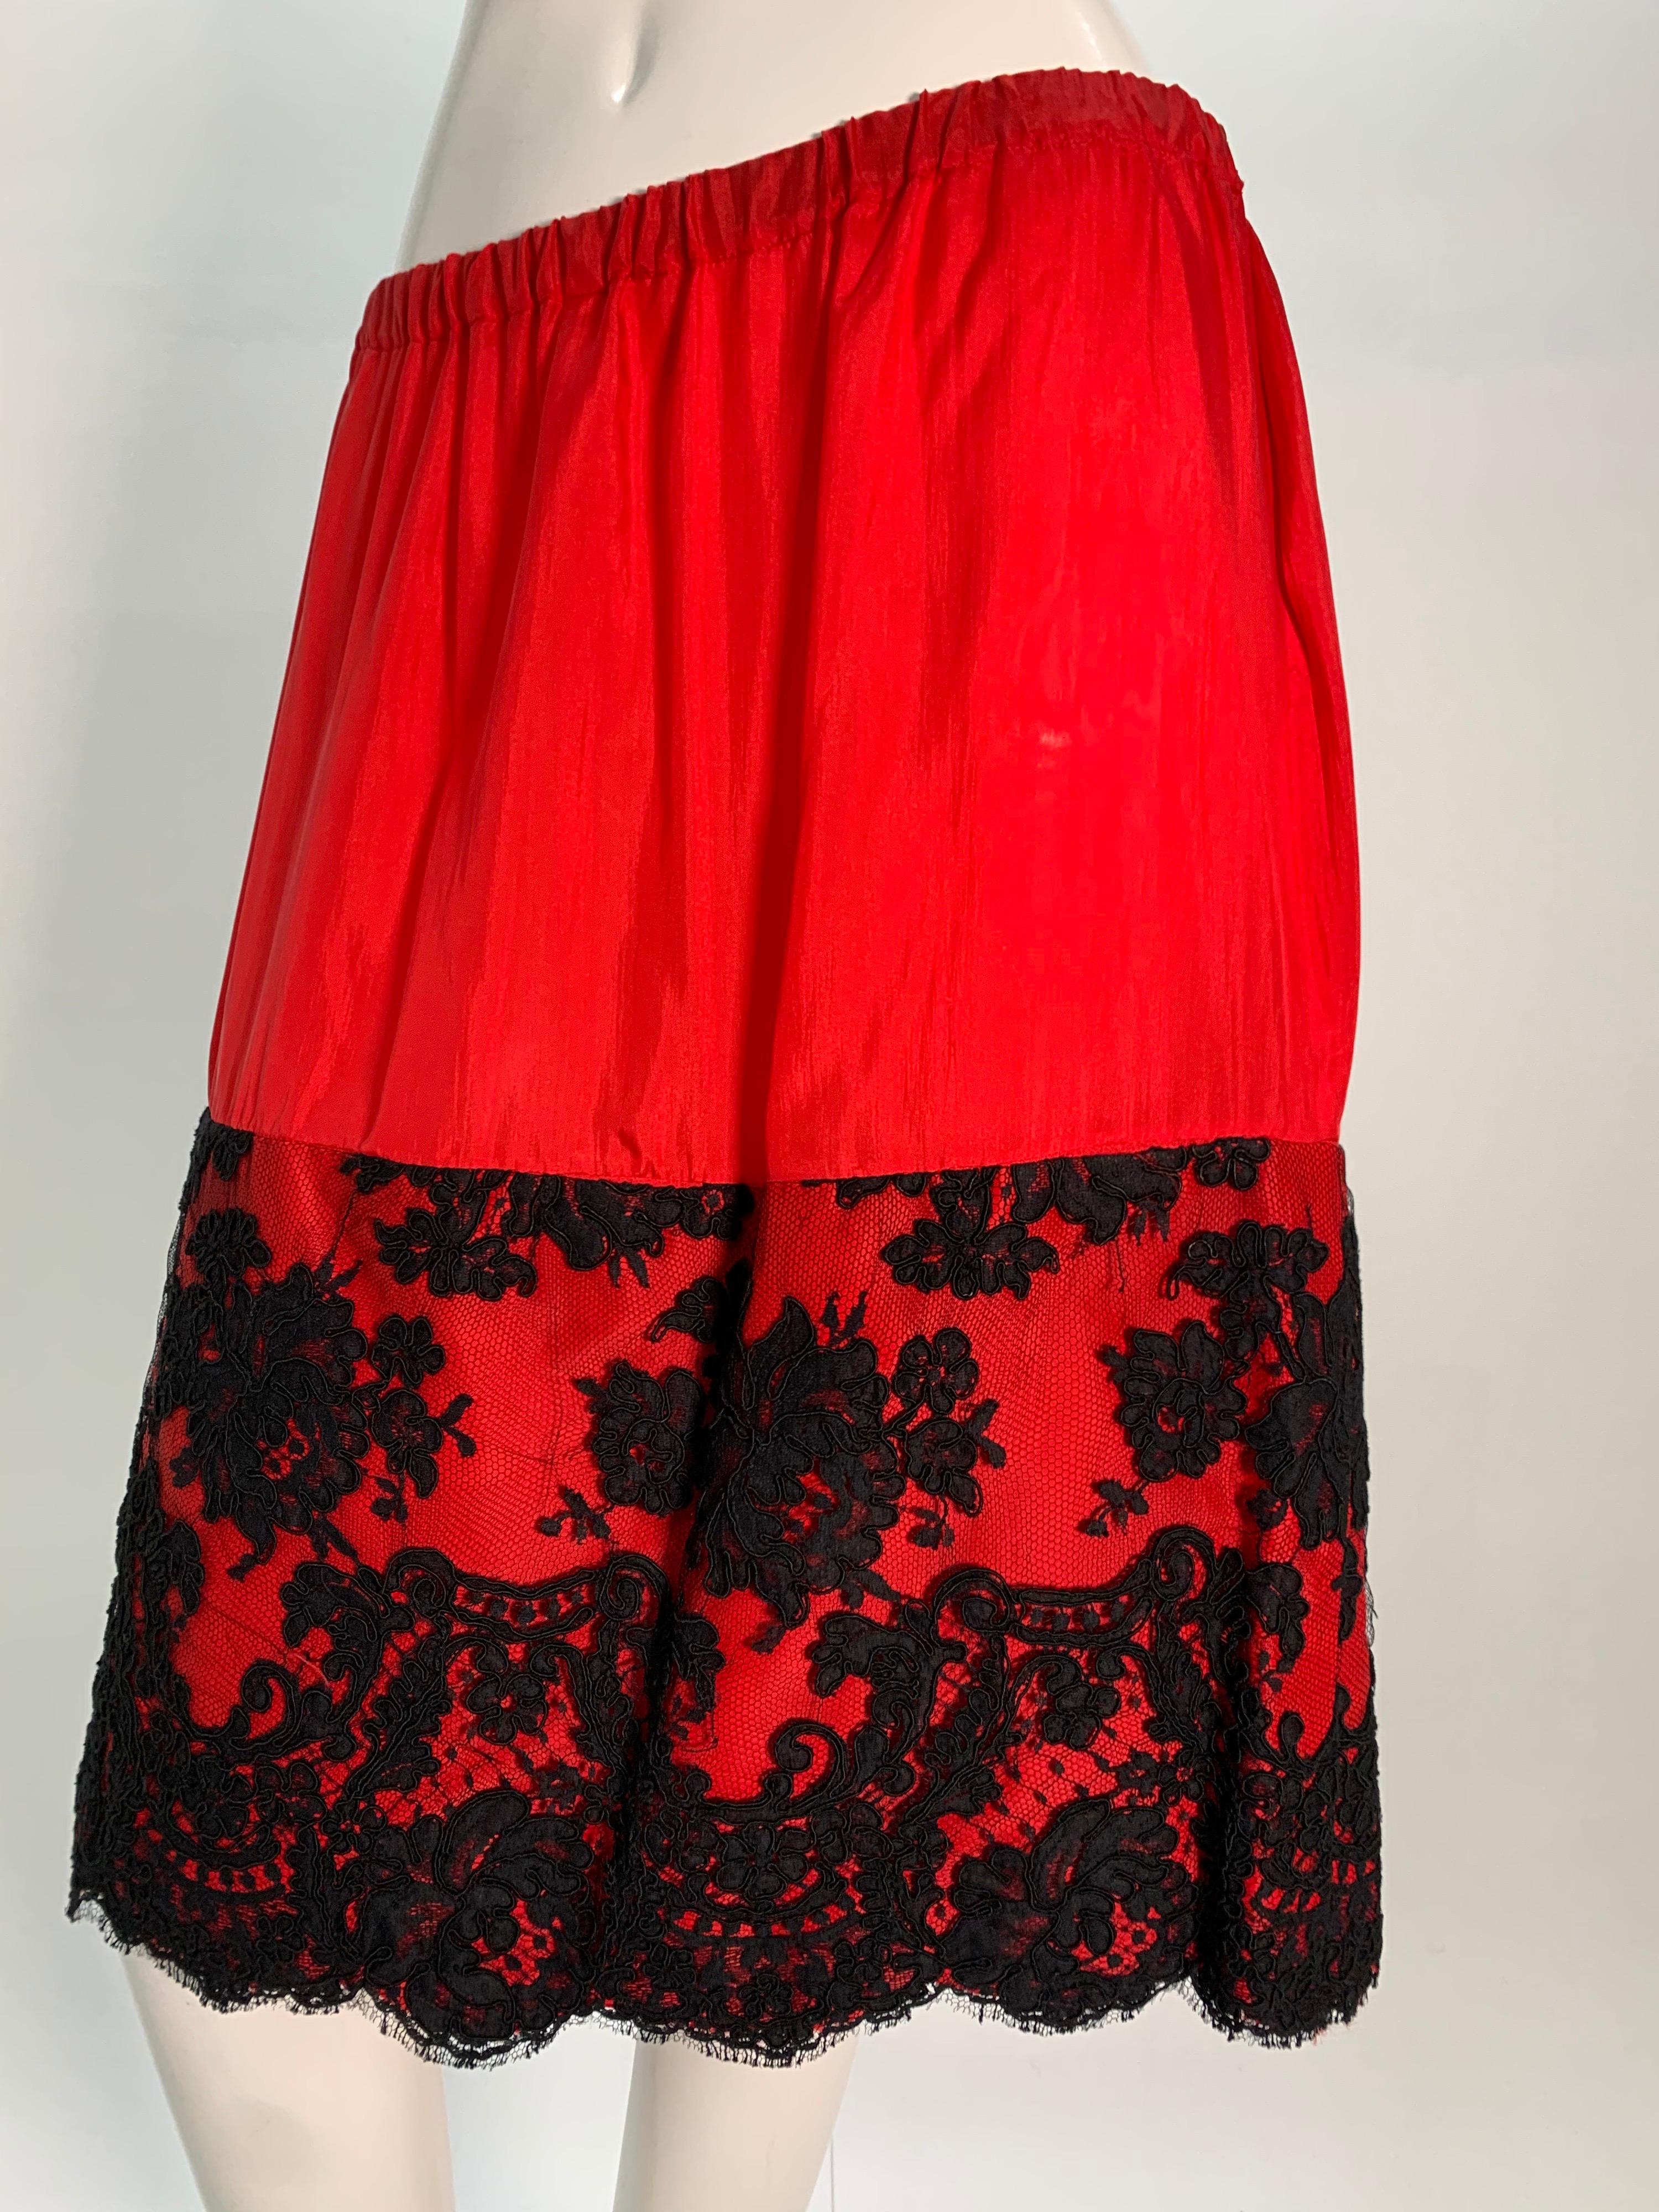 1980 Pauline Trigere Red Silk Taffeta & Black Lace Overlay Cocktail Dress  For Sale 11